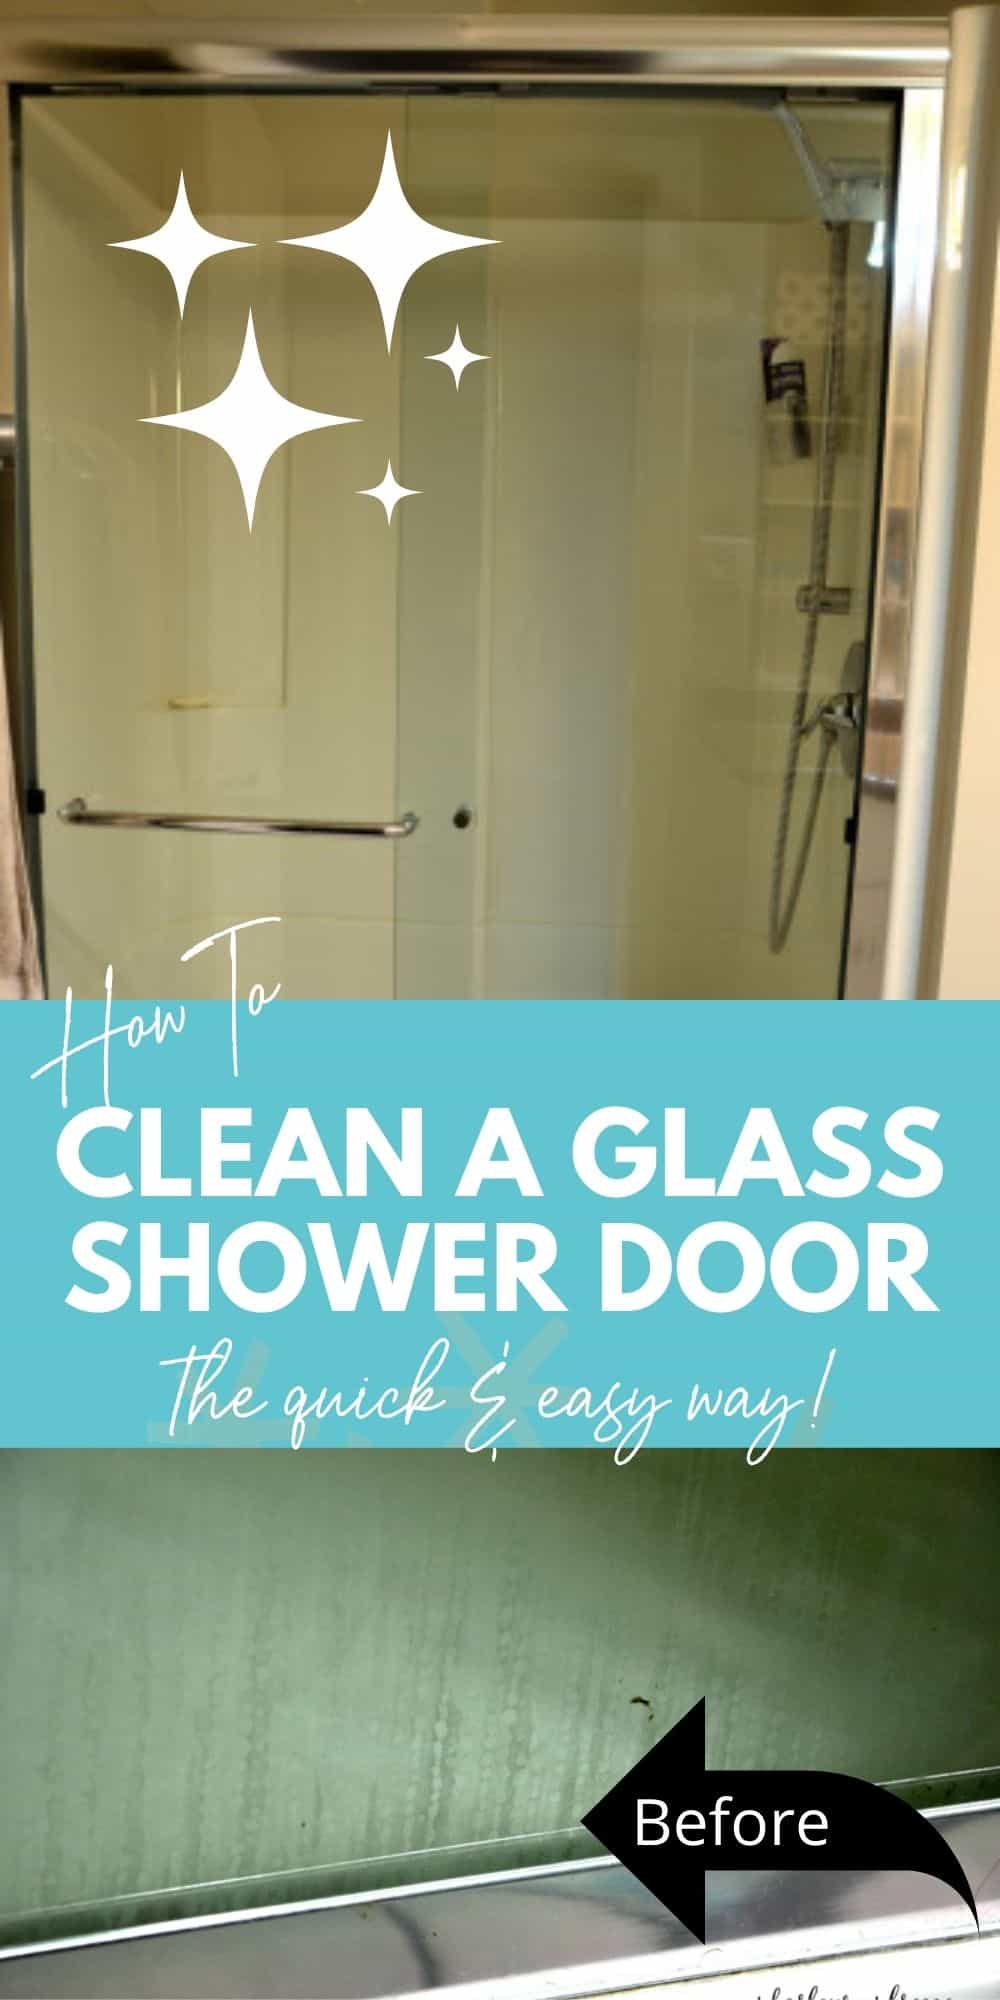 collage of a dirty glass shower door and  a clean glass shower with the test "how to clean a glass shower door the quick & easy way"